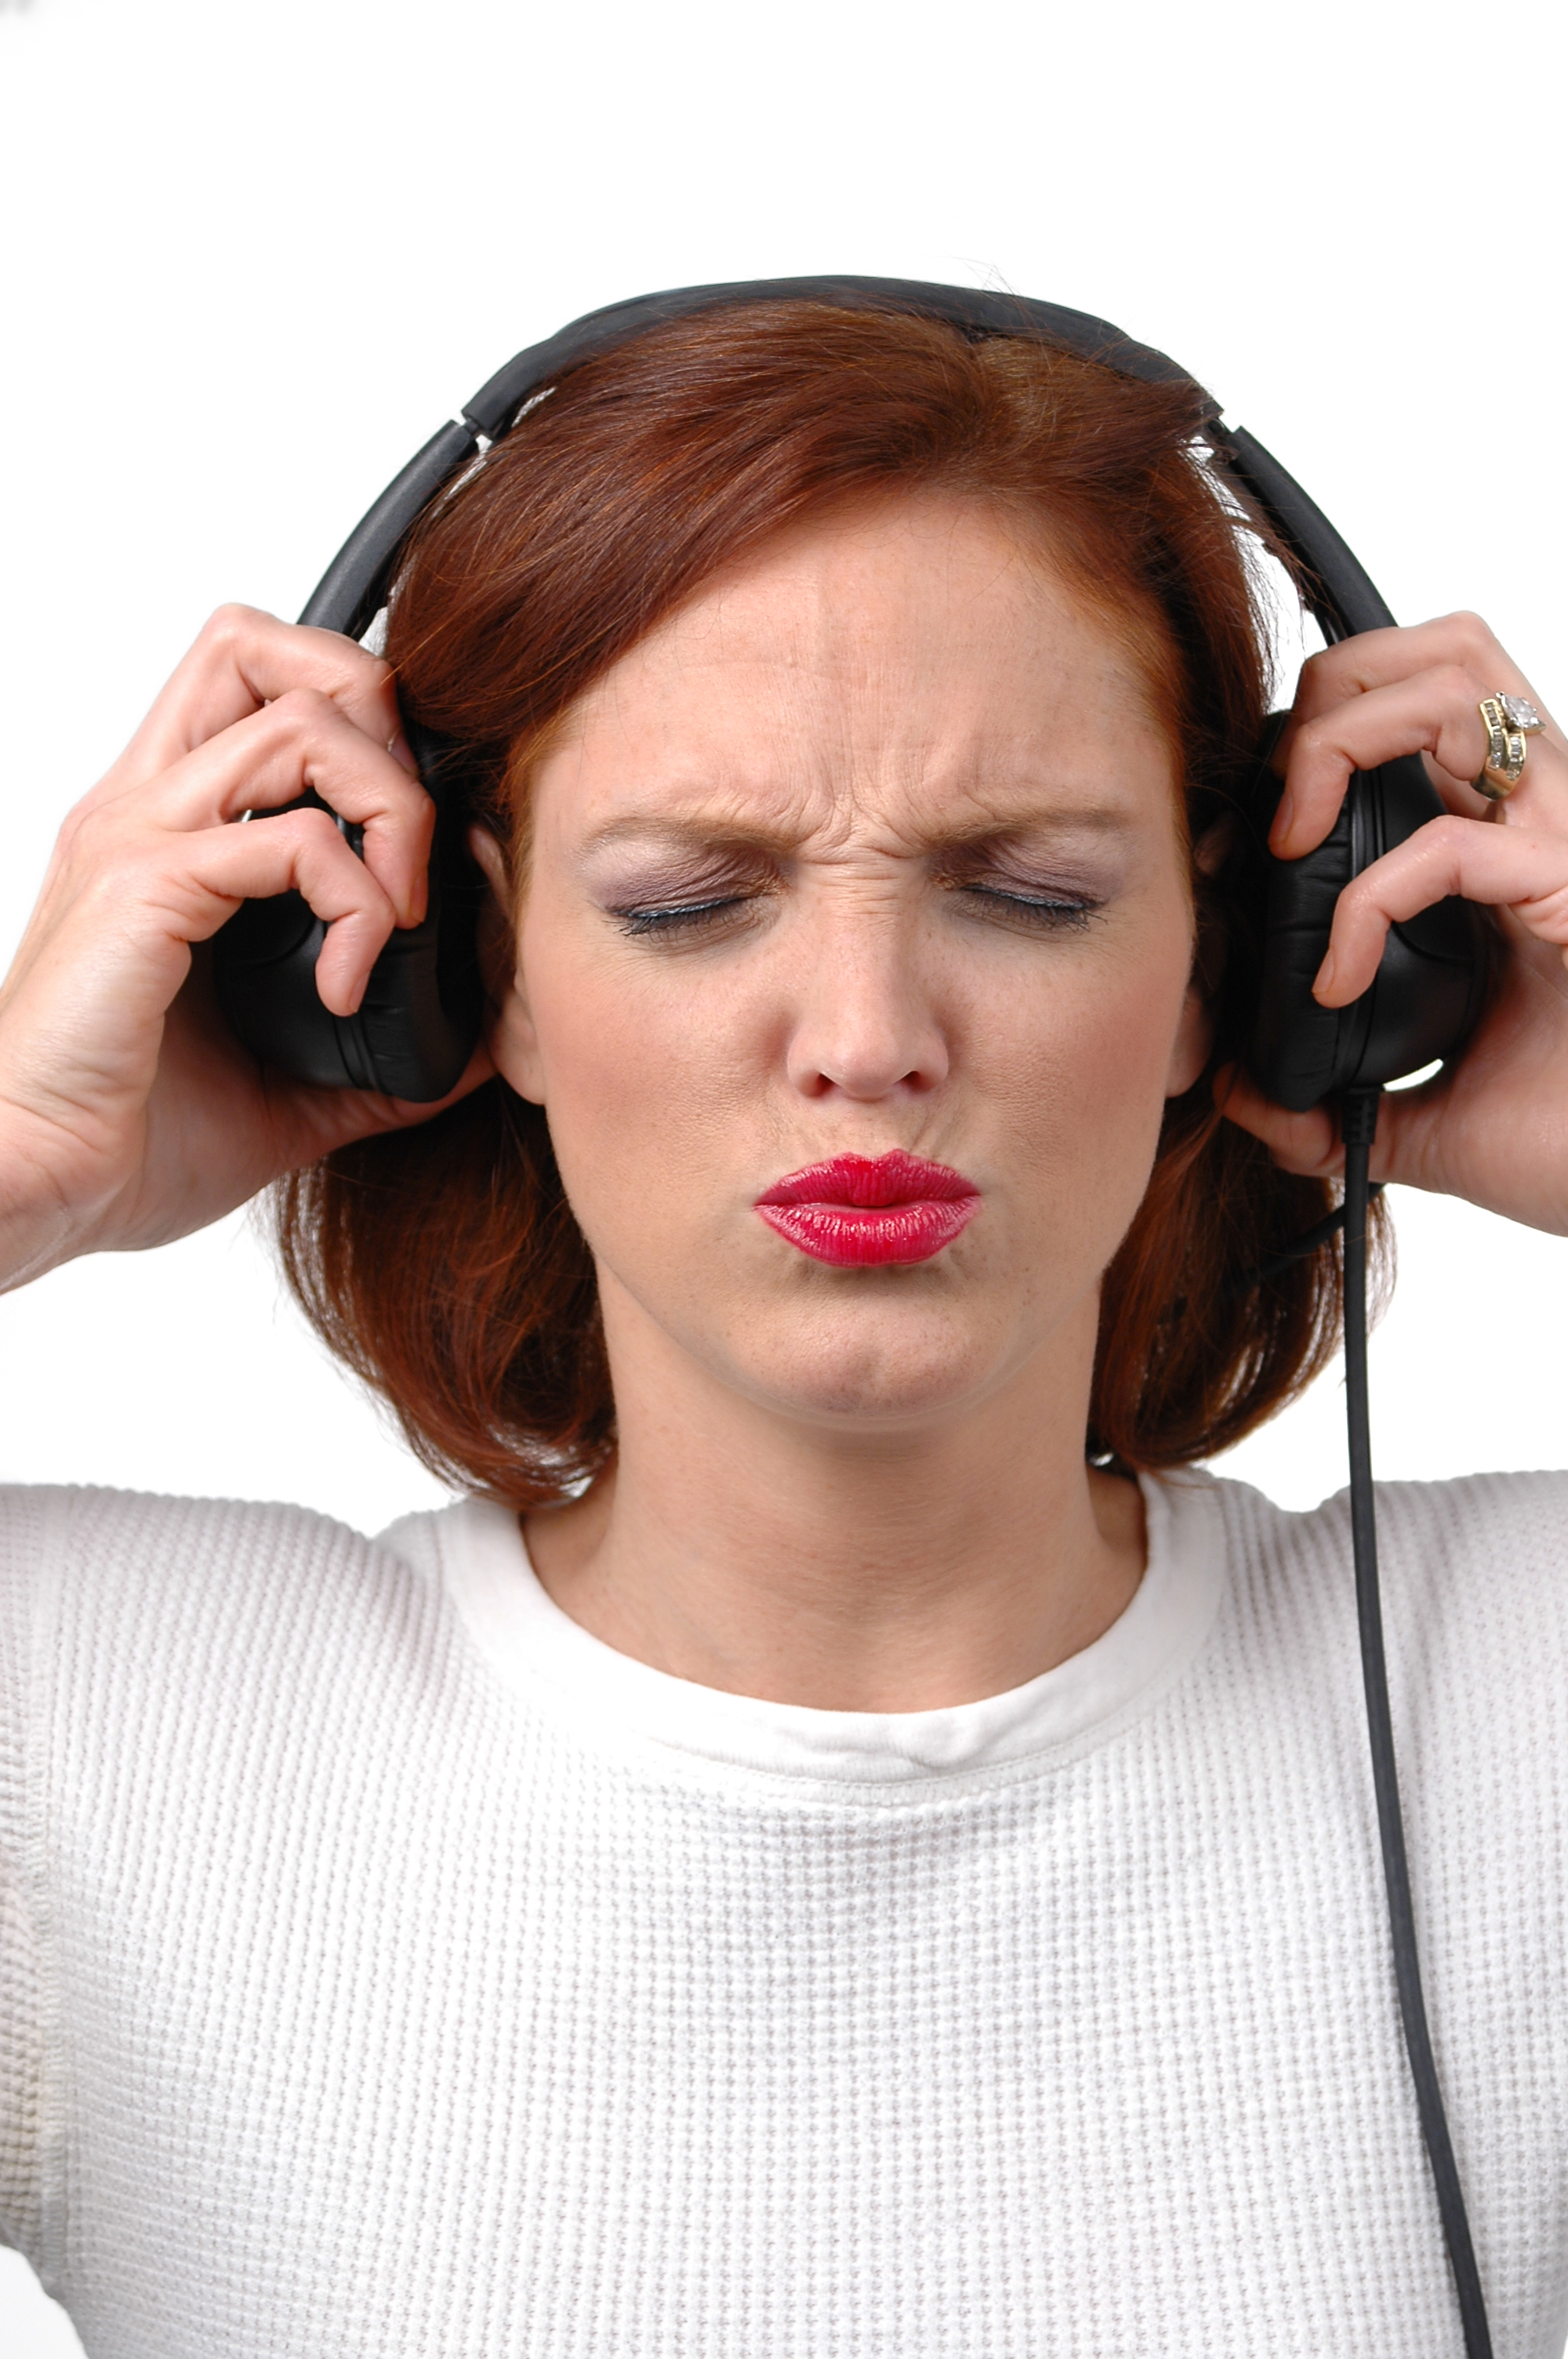 Can You Reverse Tinnitus : Temporary Tinnitus - Causes And Treatments Explained